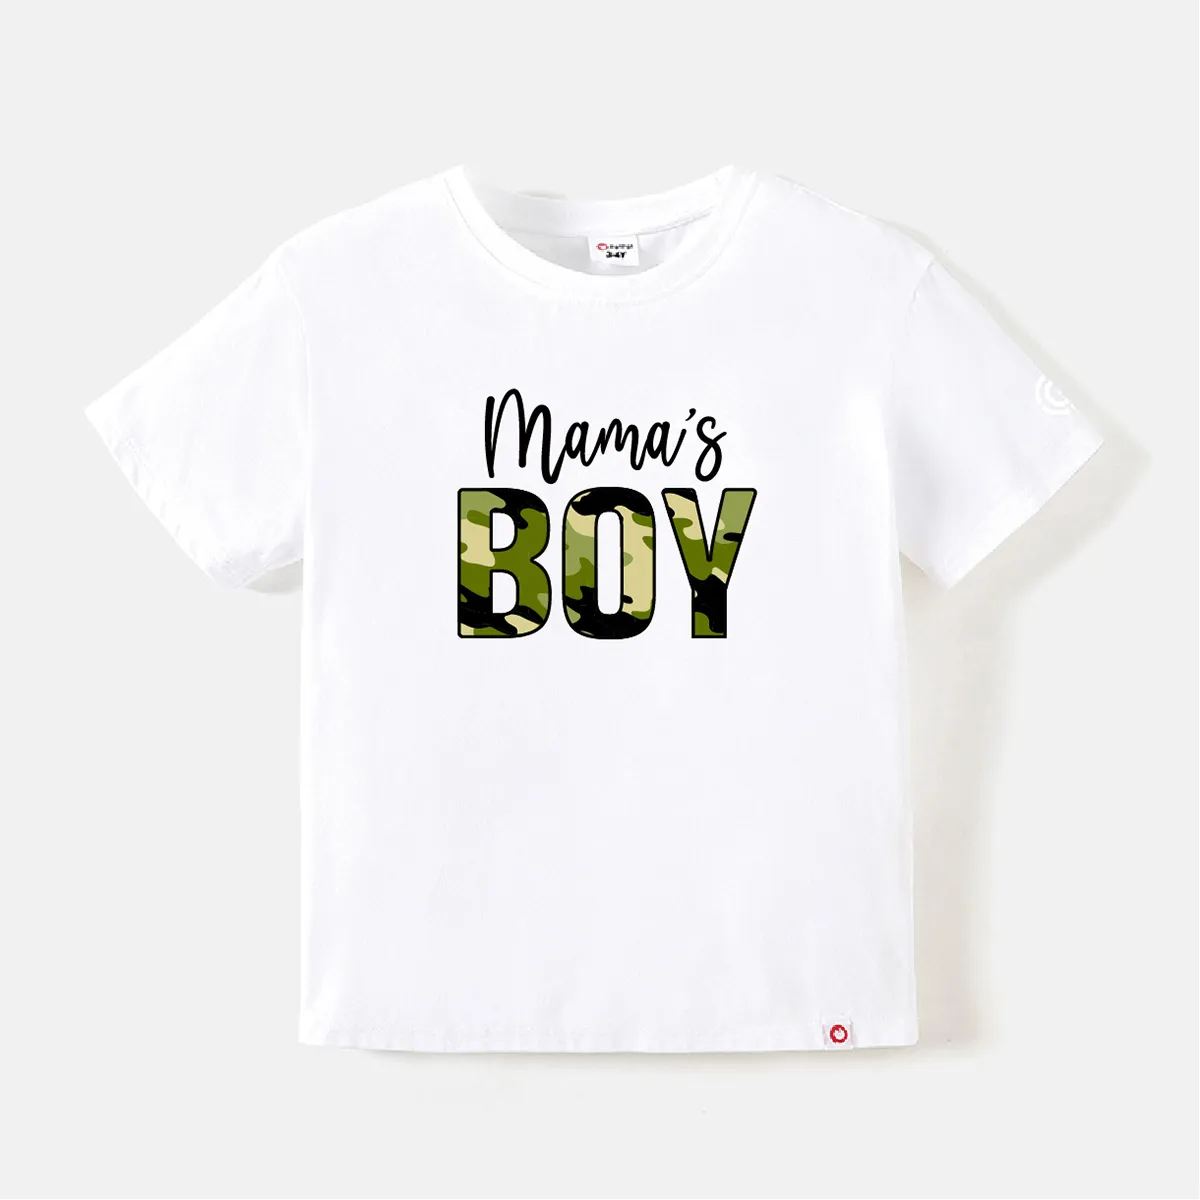 Go-Neat Water Repellent and Stain Resistant Mommy and Me Camouflage Letter Print Short-sleeve Tee White big image 1